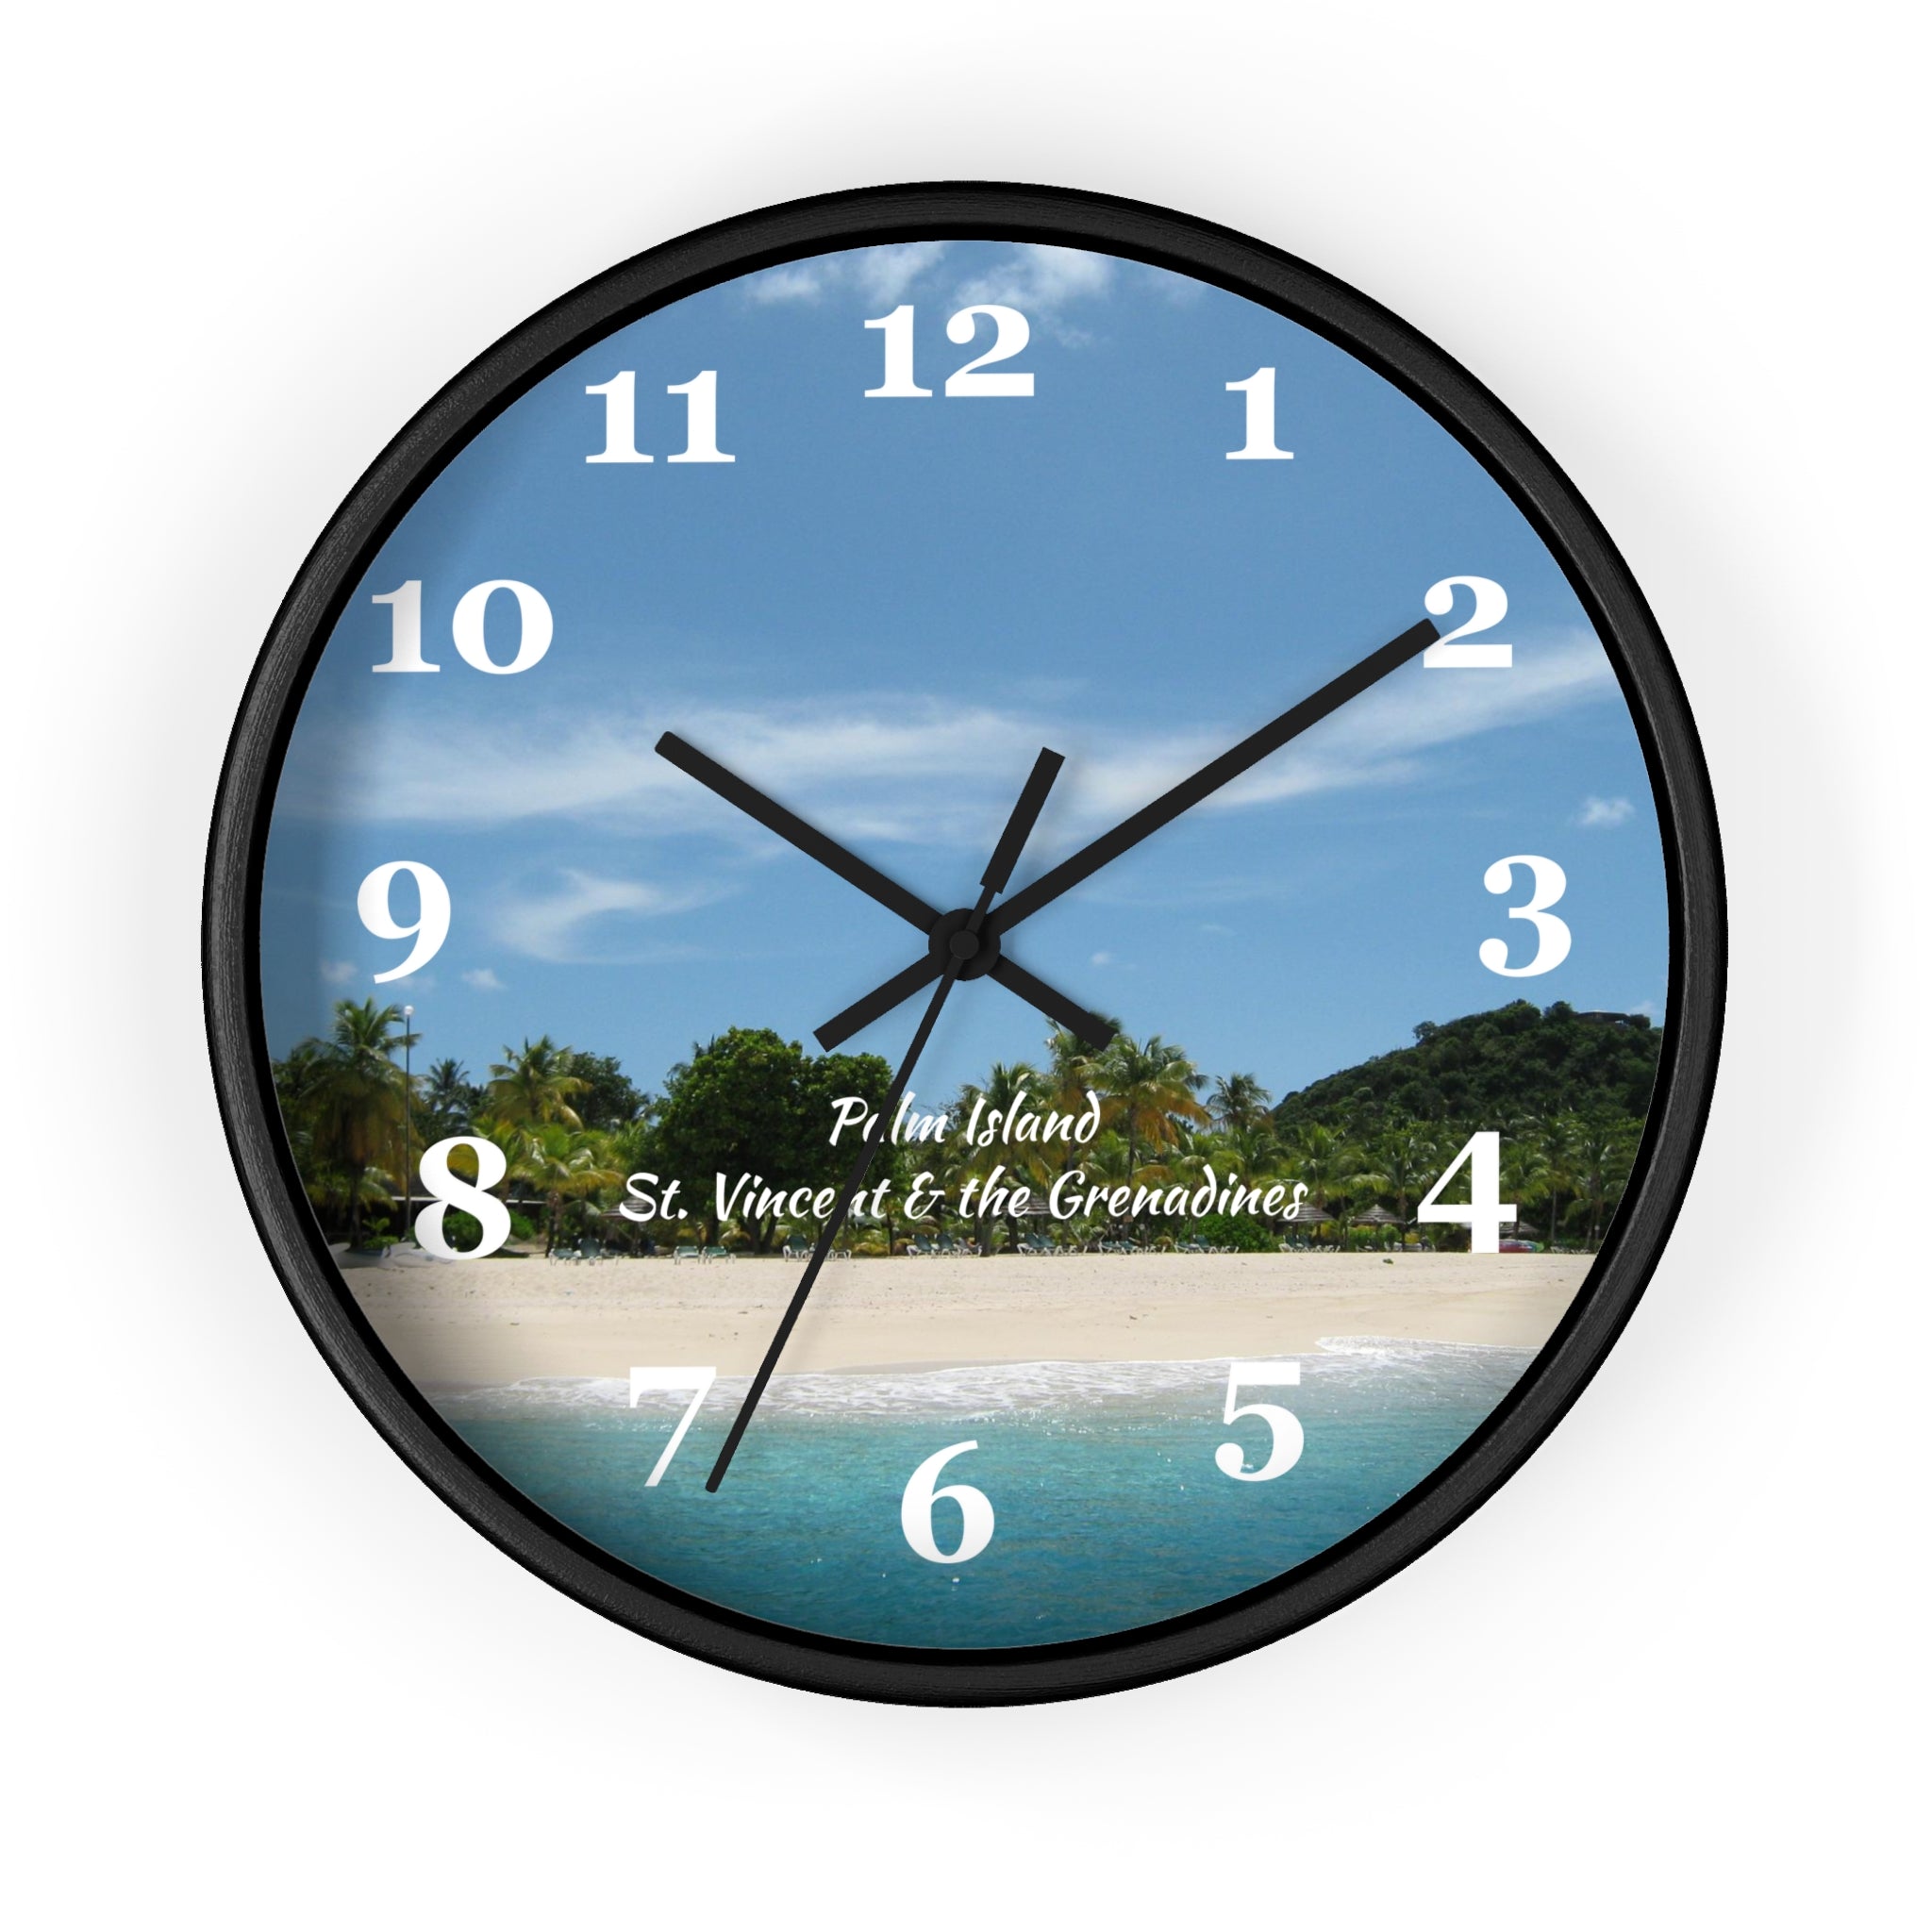 10 inch round wall clock showing a picture of Palm Island beach in St. Vincent and the Grenadines